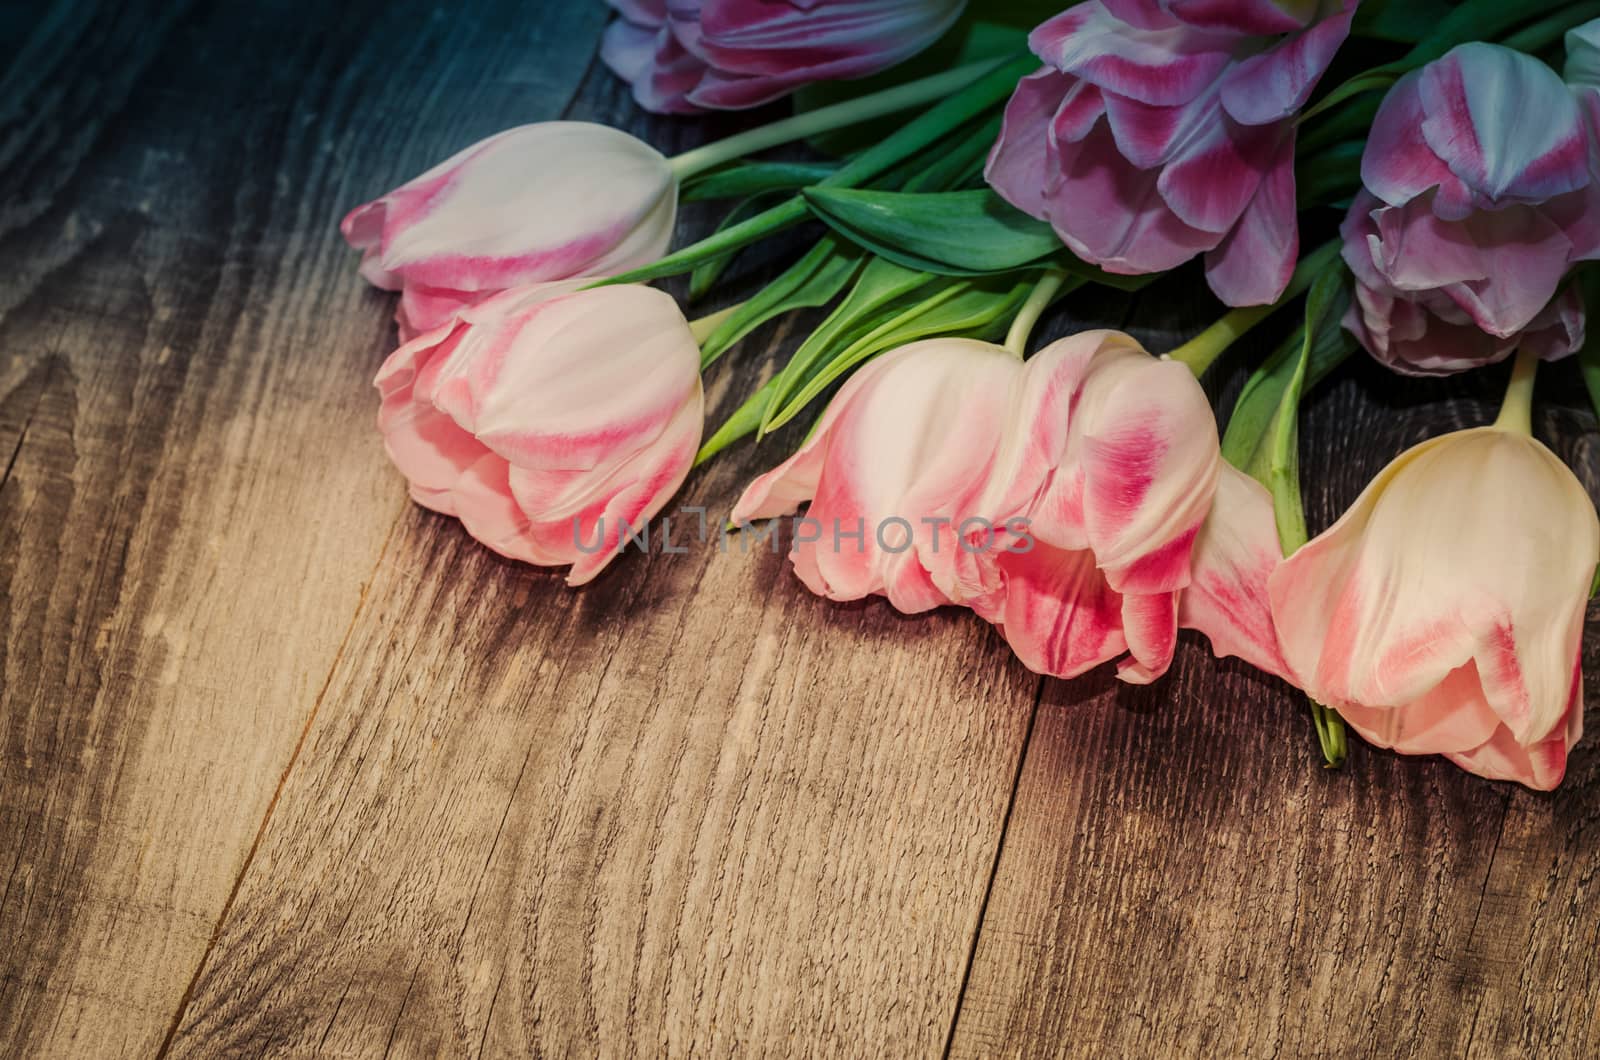 Bouquet of pink tulips on the background of old wooden boards with a place for the inscription, toned.